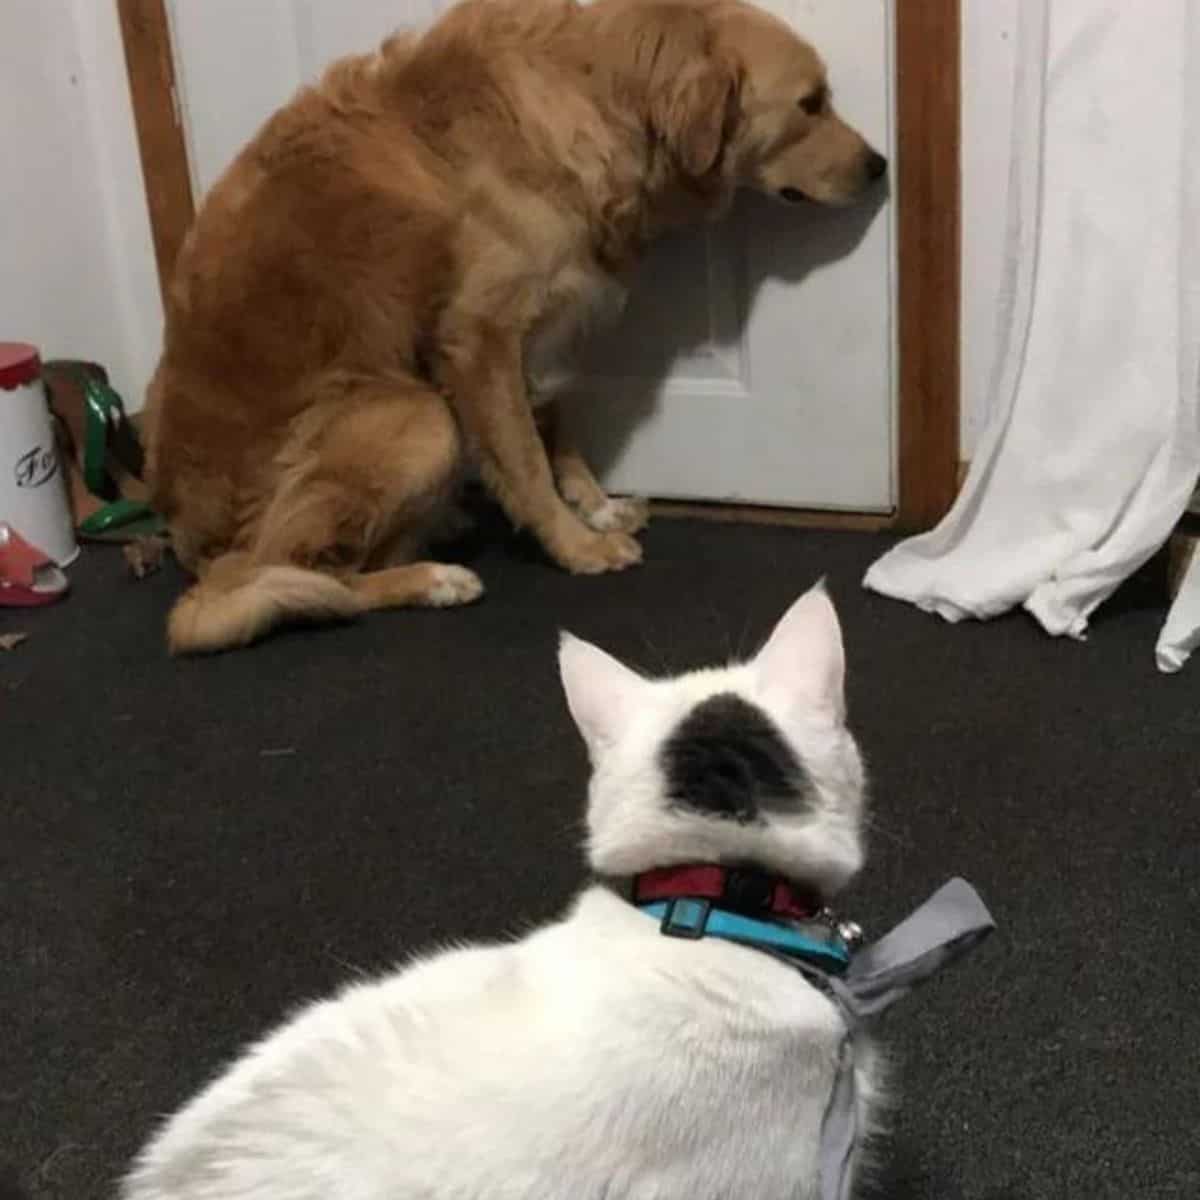 cat looking at scared dog